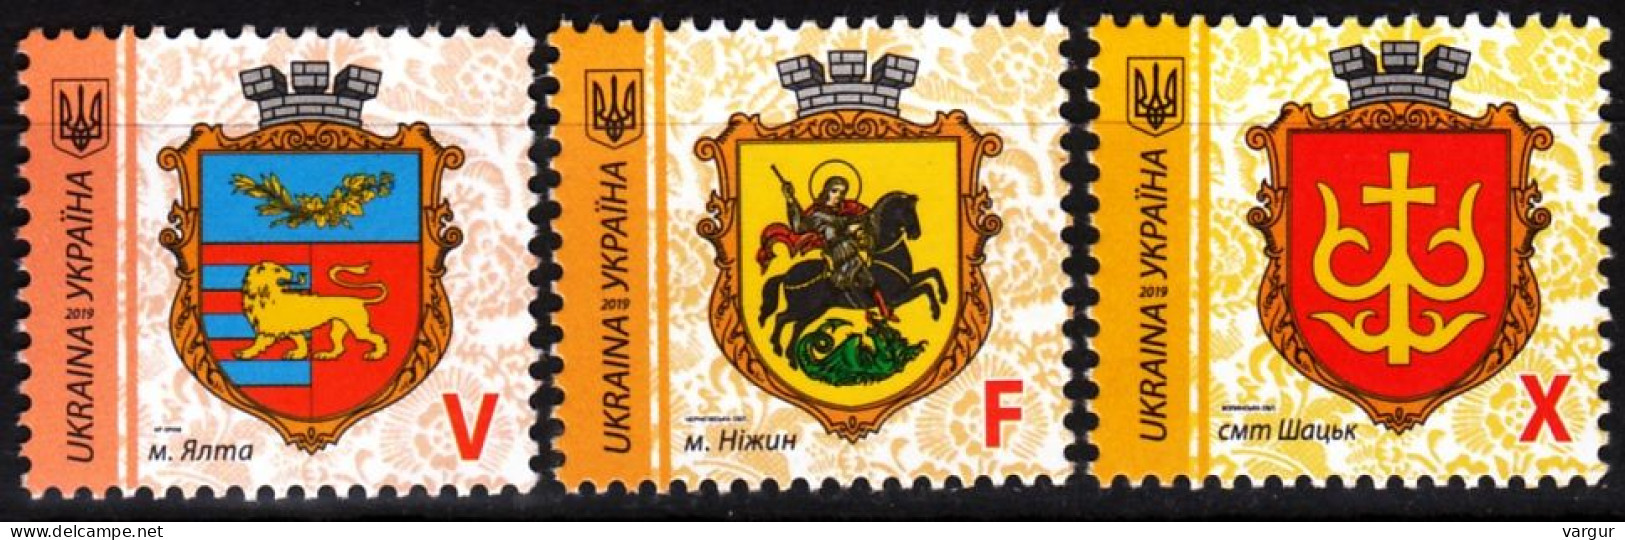 UKRAINE 2019-13 Definitive: Heraldry City Arms, 3v. Re-printing. Issues 1 & 2, MNH - Sellos